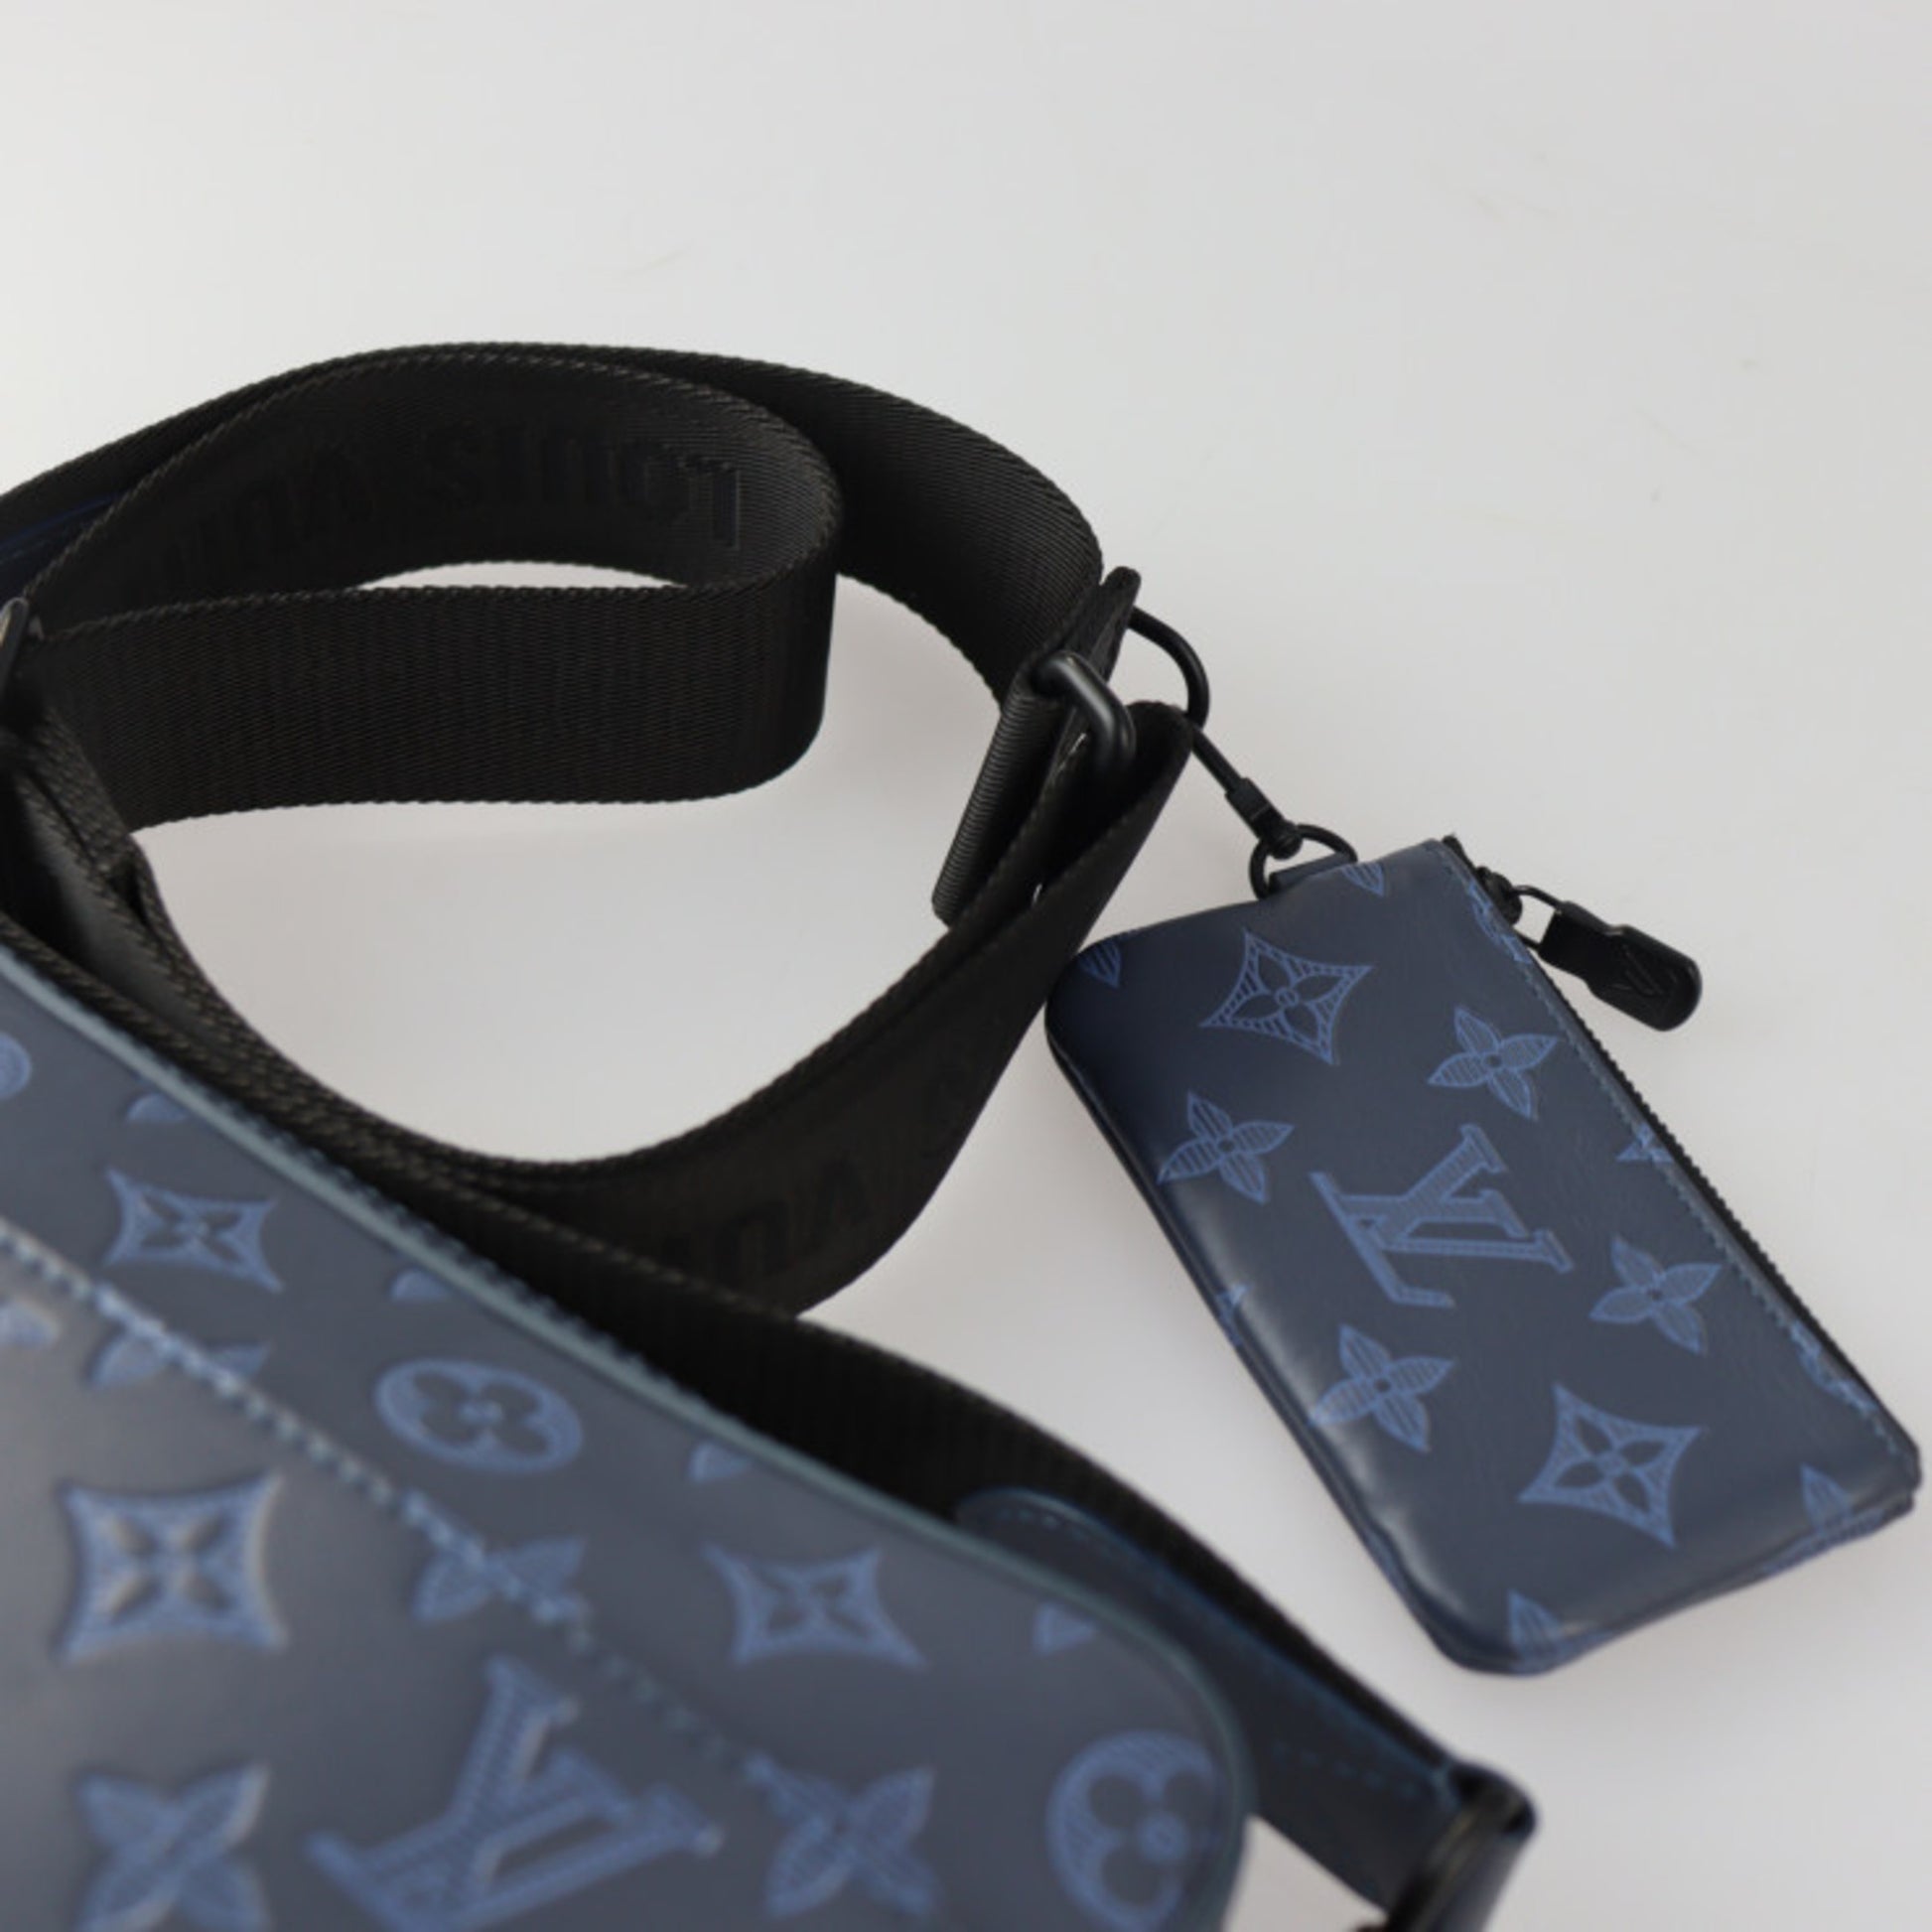 M45730 LOUIS VUITTON DUO MESSENGER BAG NAVY BLUE MONOGRAM SHADOW COWHIDE  LEATHER - REPGOD.ORG/IS - Trusted Replica Products - ReplicaGods -  REPGODS.ORG